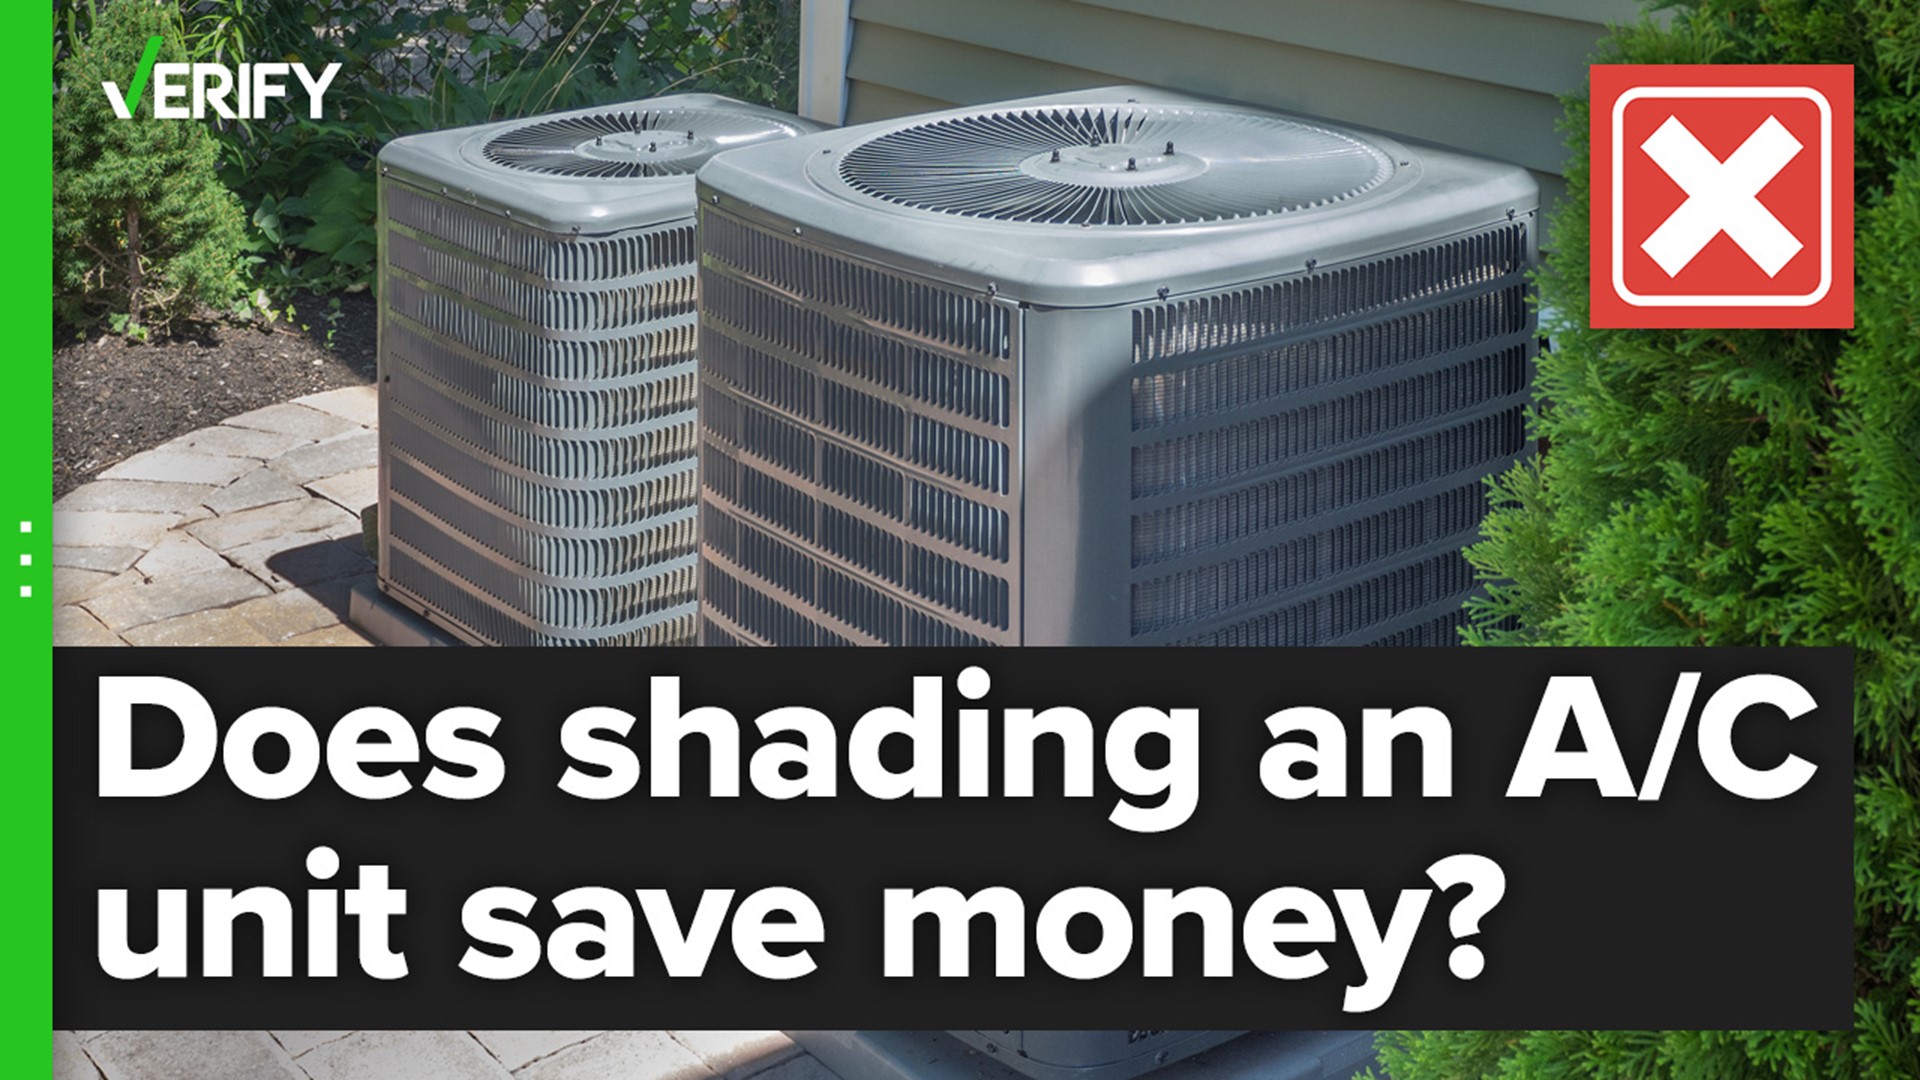 Putting a shade over your central A/C unit doesn’t make it run more efficiently. In fact, it could actually cause added problems.